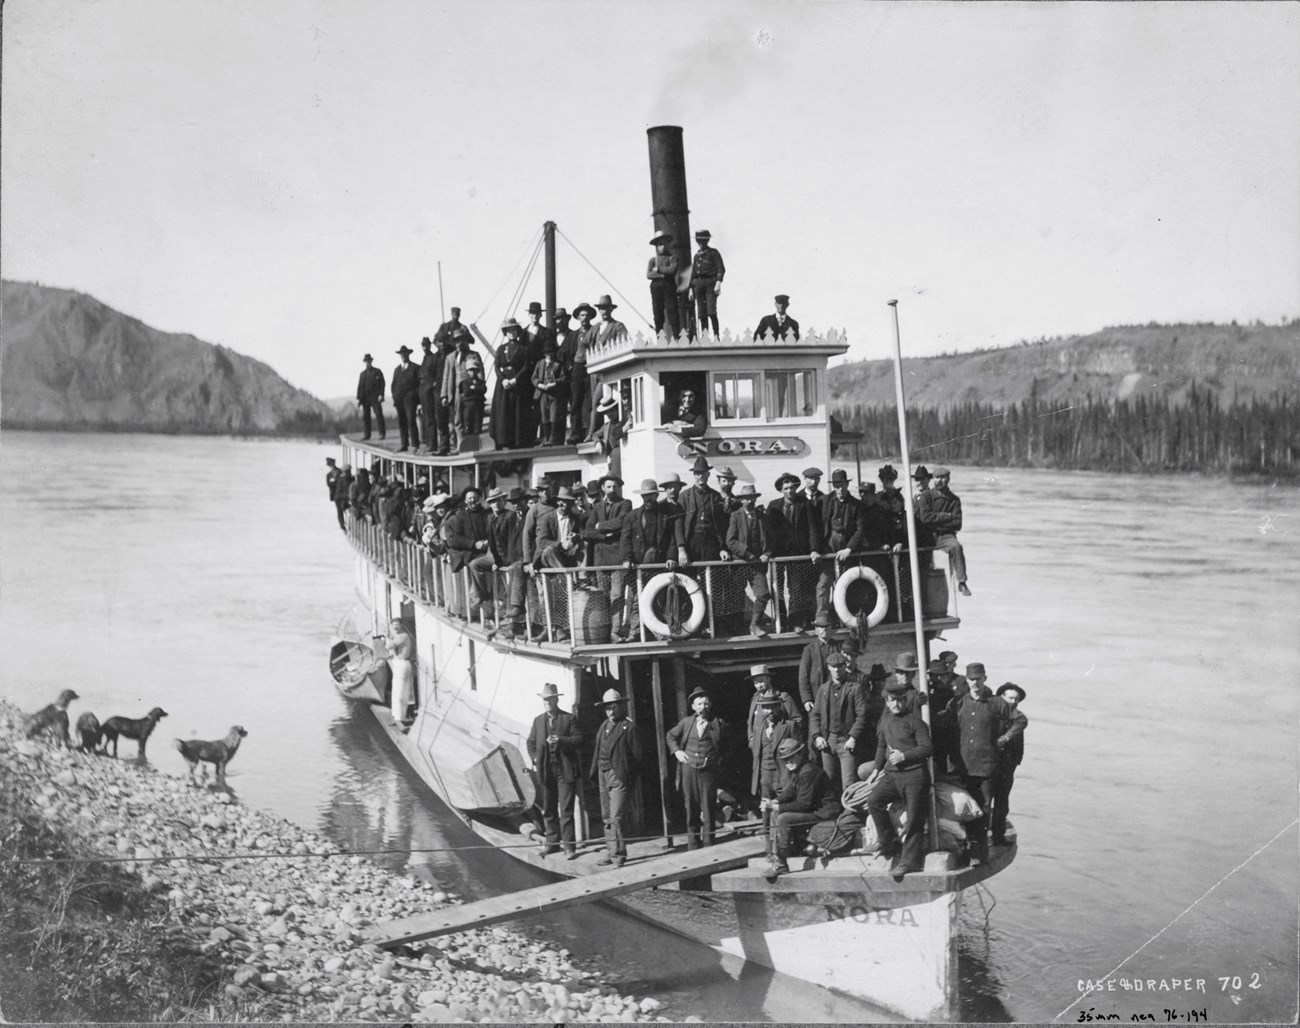 Steamboat Nora fully loaded with stampeders departing Canadian territory for Nome, 1899